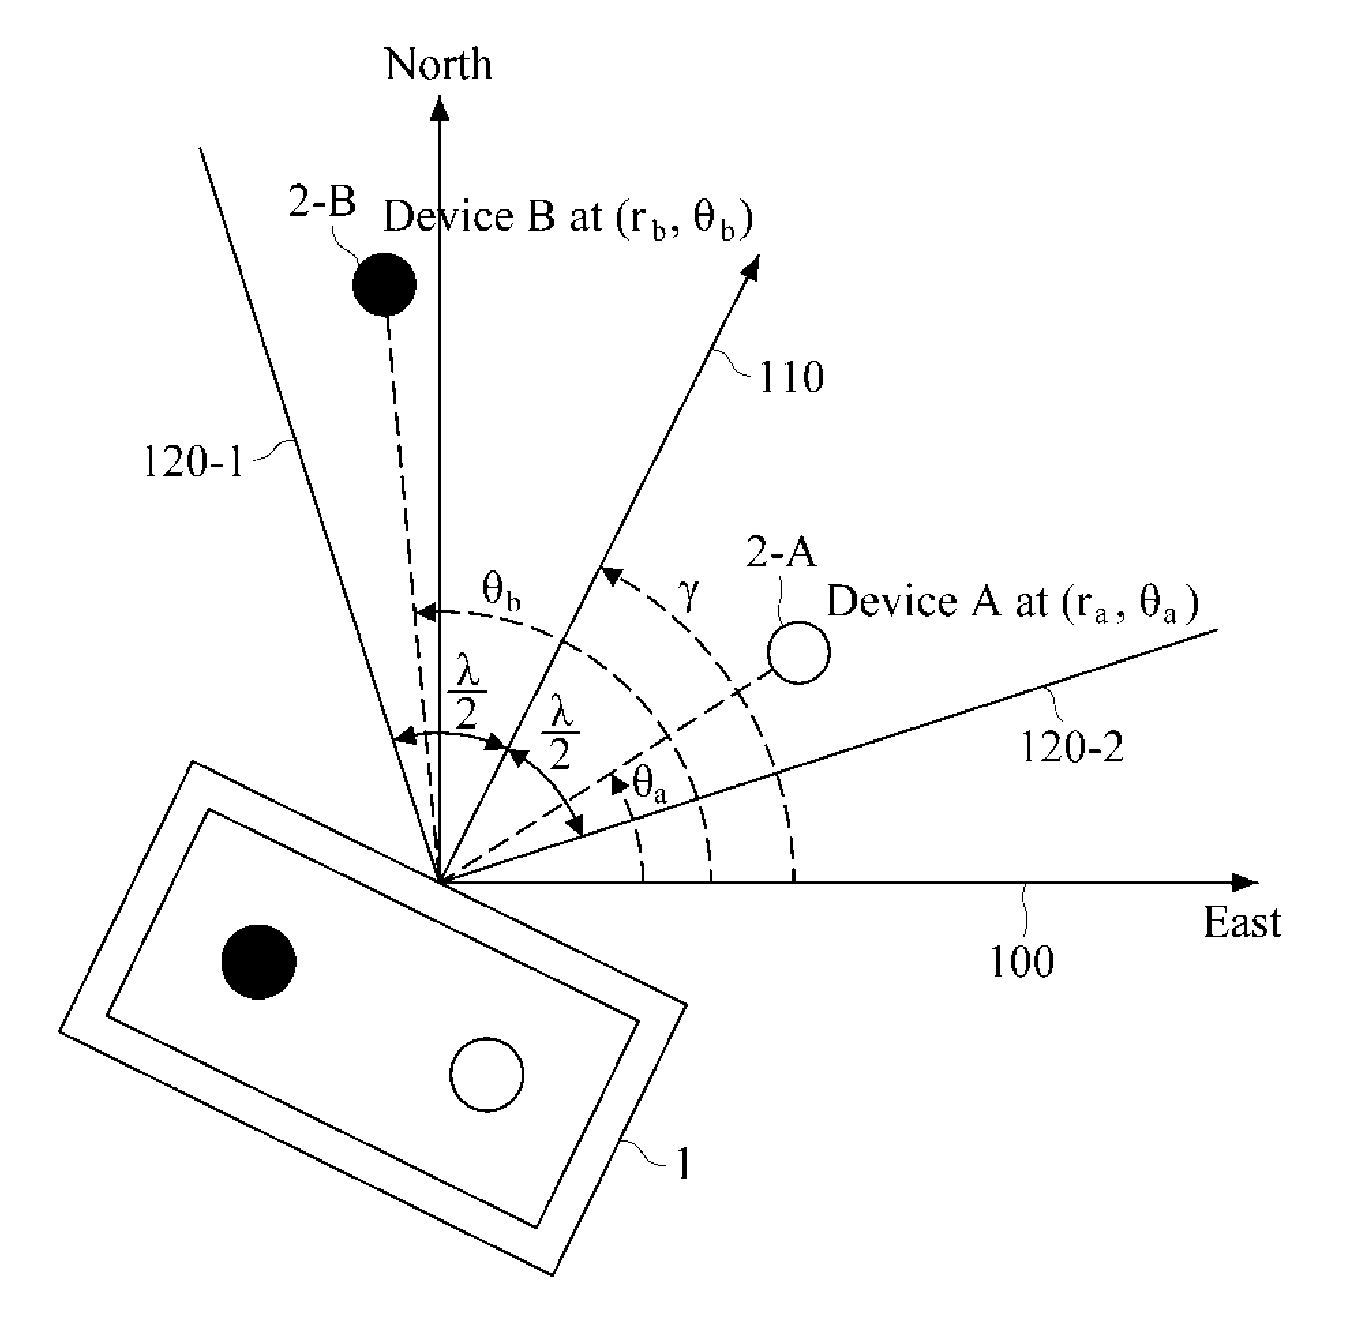 Terminal and method for recognizing communication target